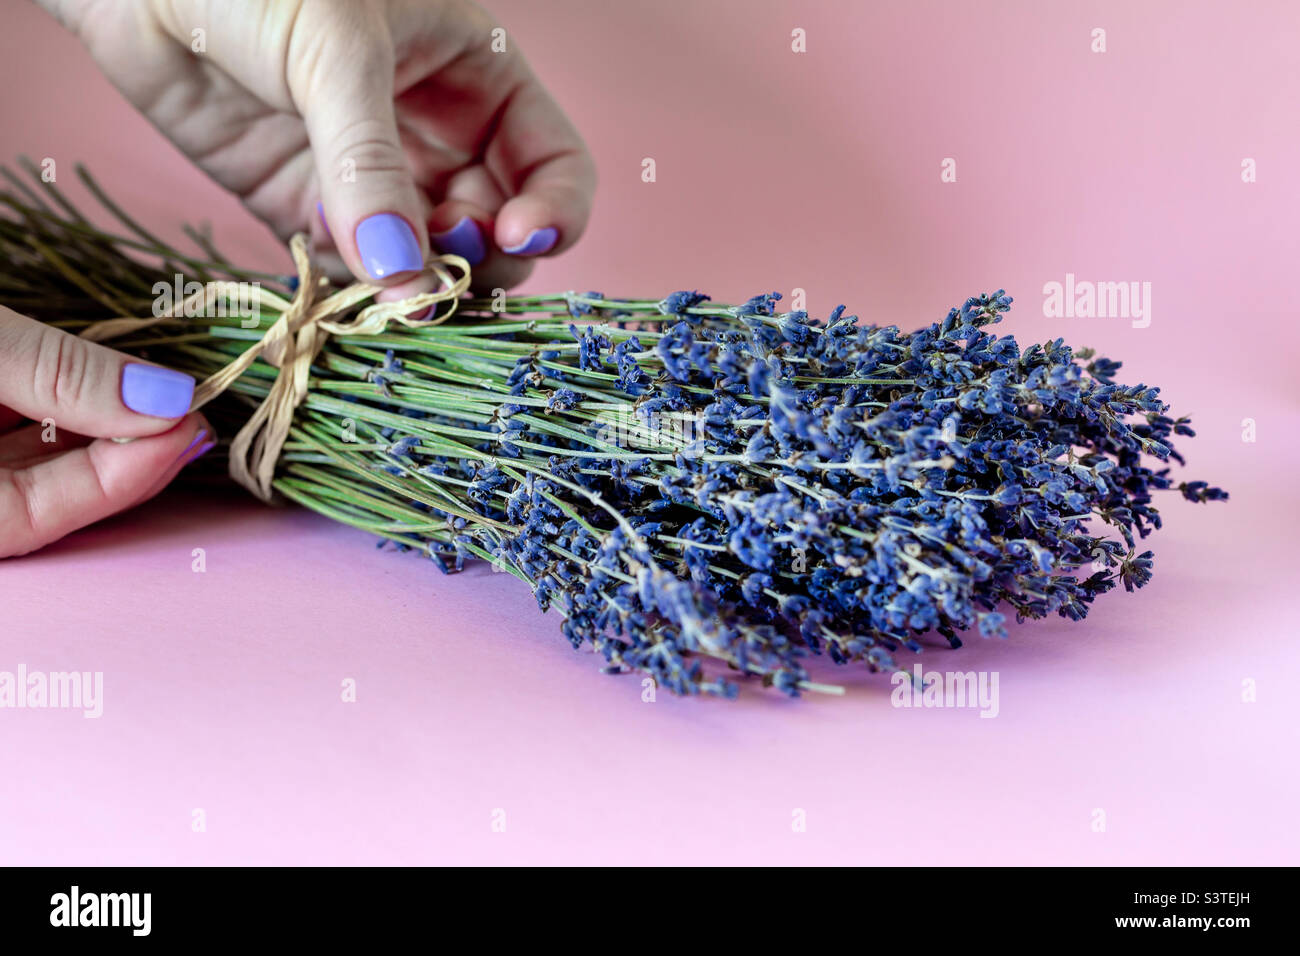 Woman making bouquet from lavender flowers, hands only in frame Stock Photo